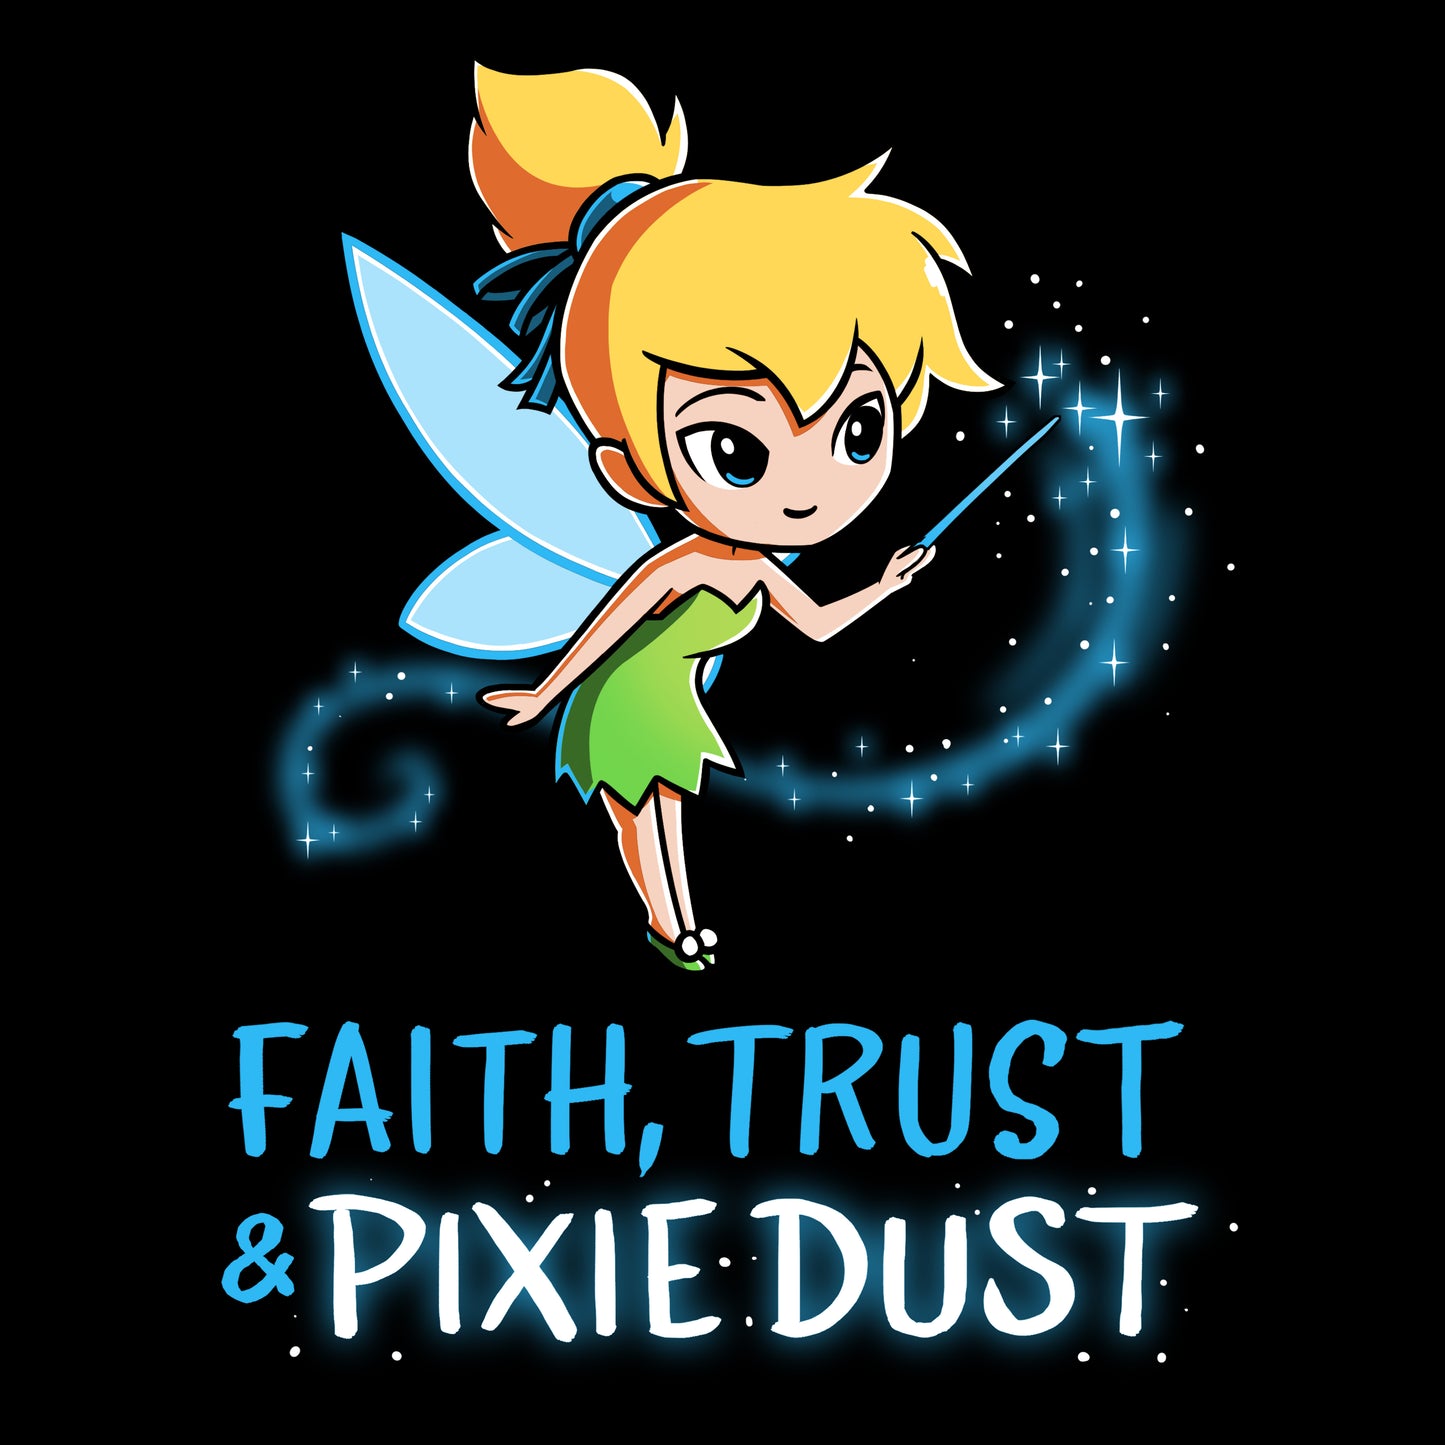 Officially licensed Disney Tinker Bell T-shirt featuring Faith, Trust & Pixie Dust.